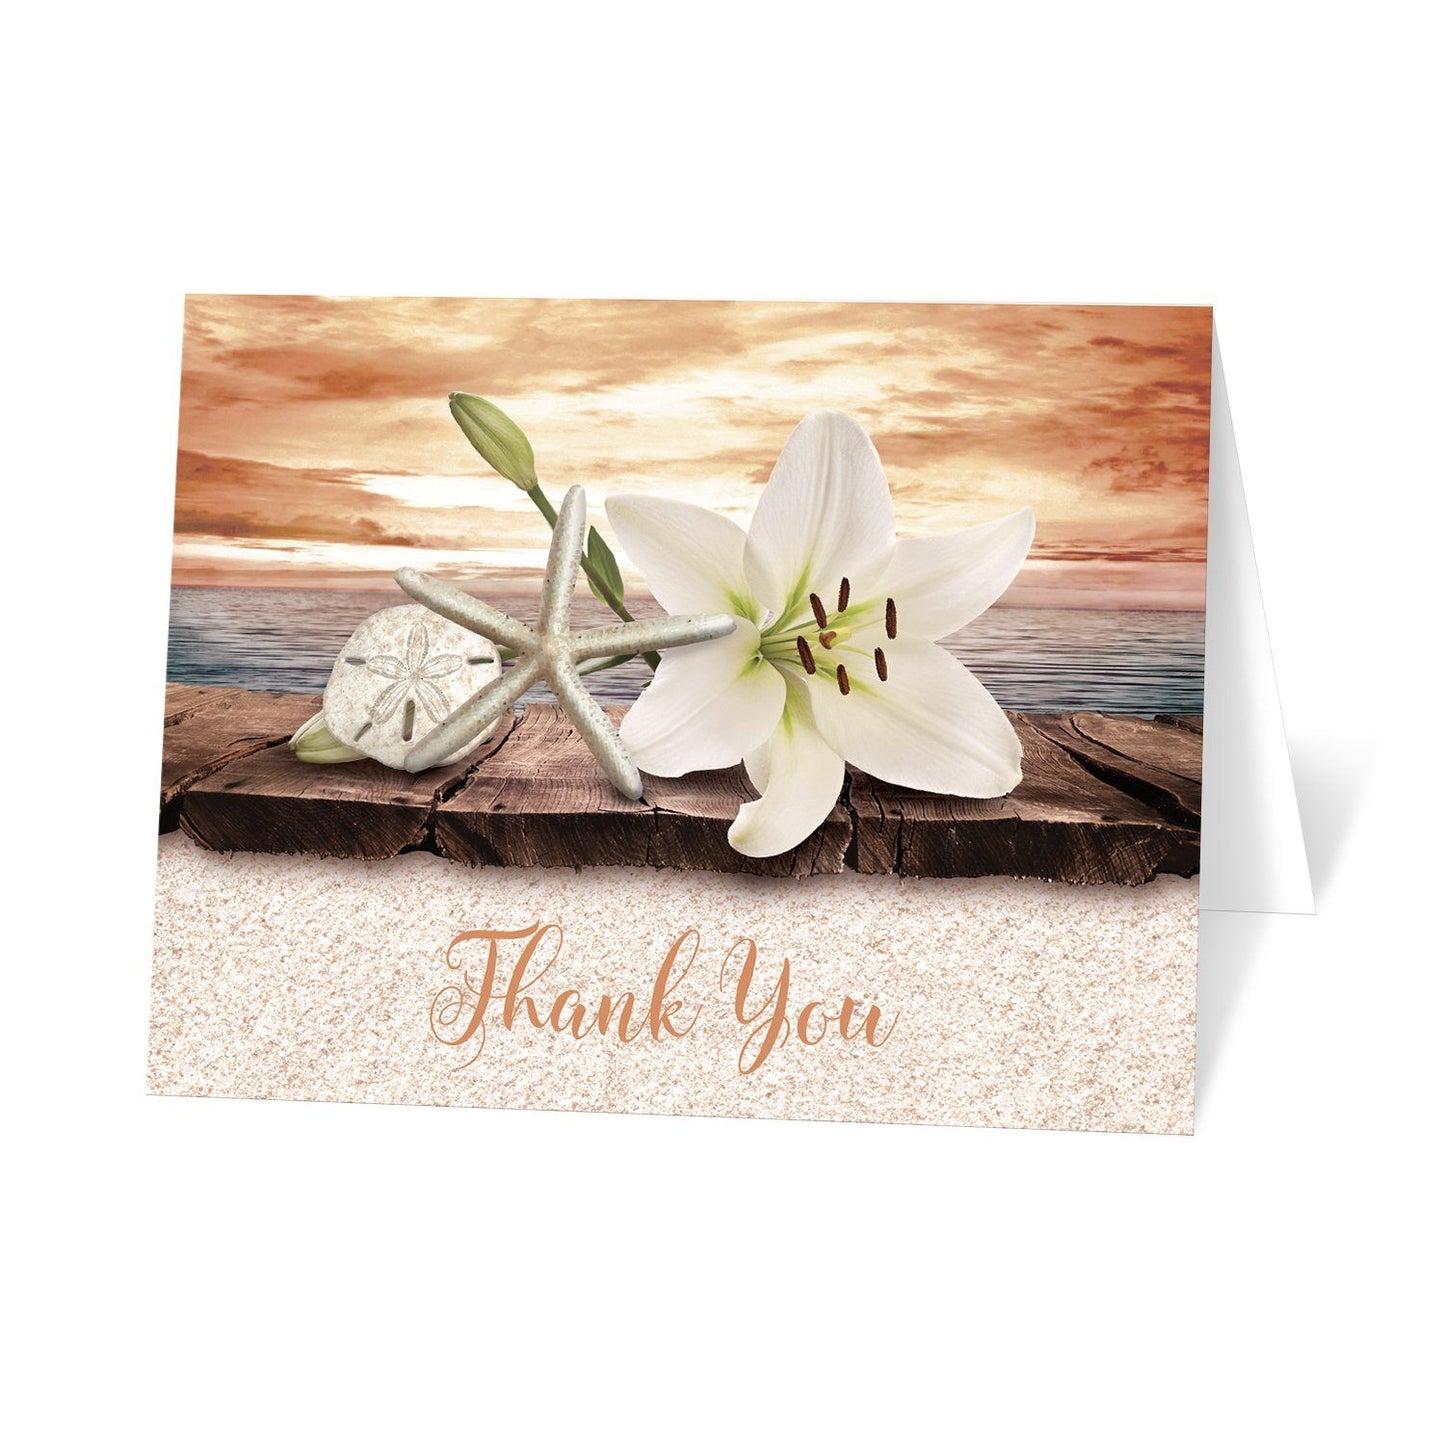 Lily Seashells and Sand Autumn Beach Thank You Cards at Artistically Invited